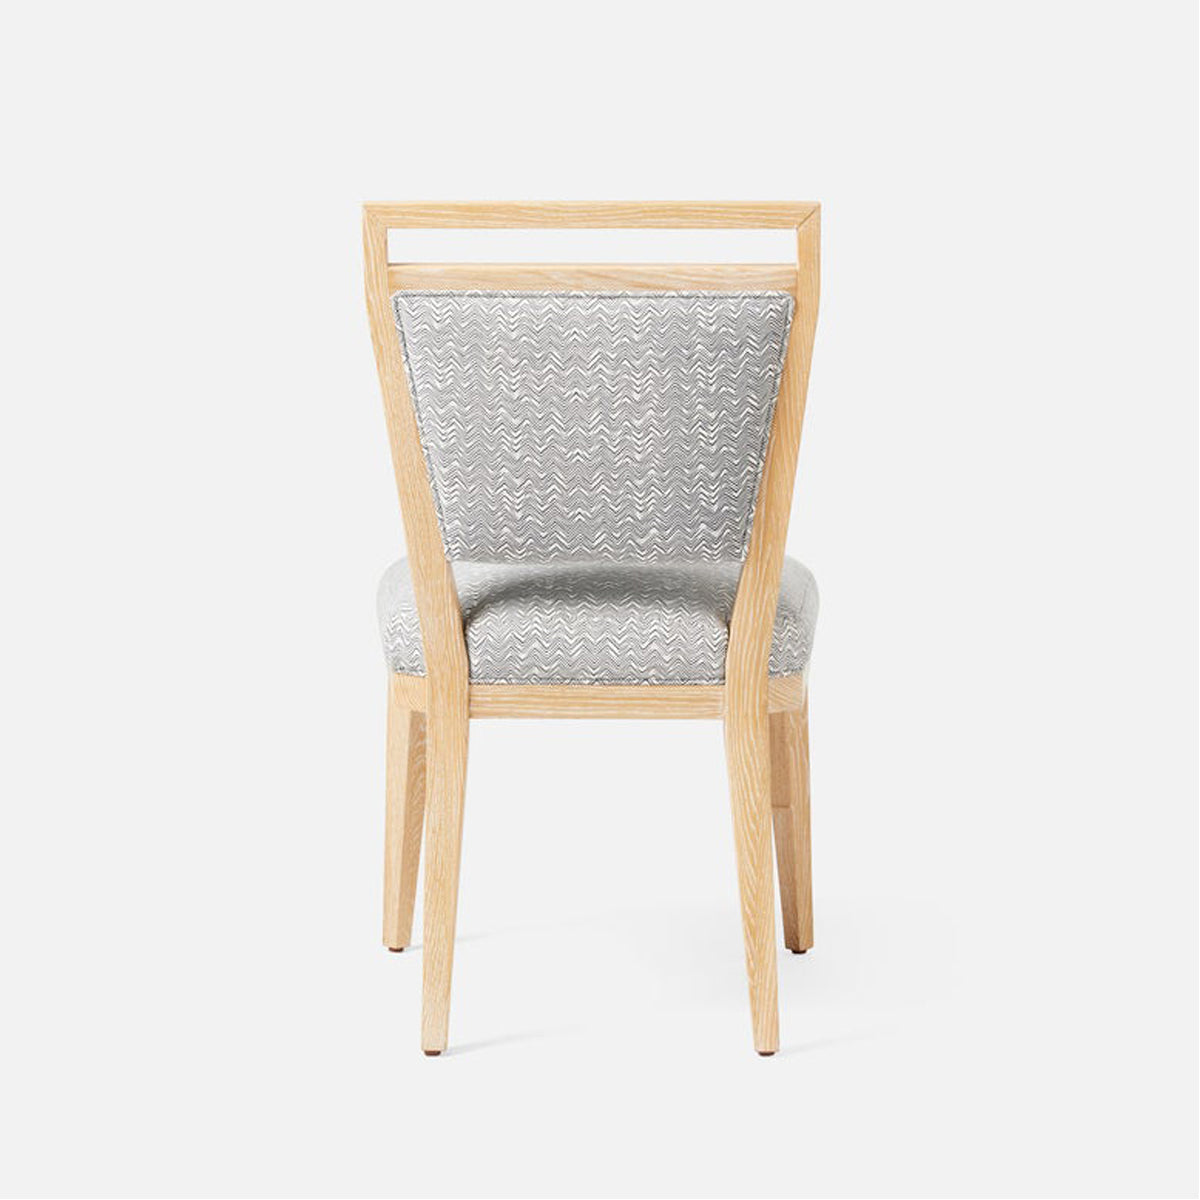 Made Goods Patrick Dining Chair in Pagua Fabric